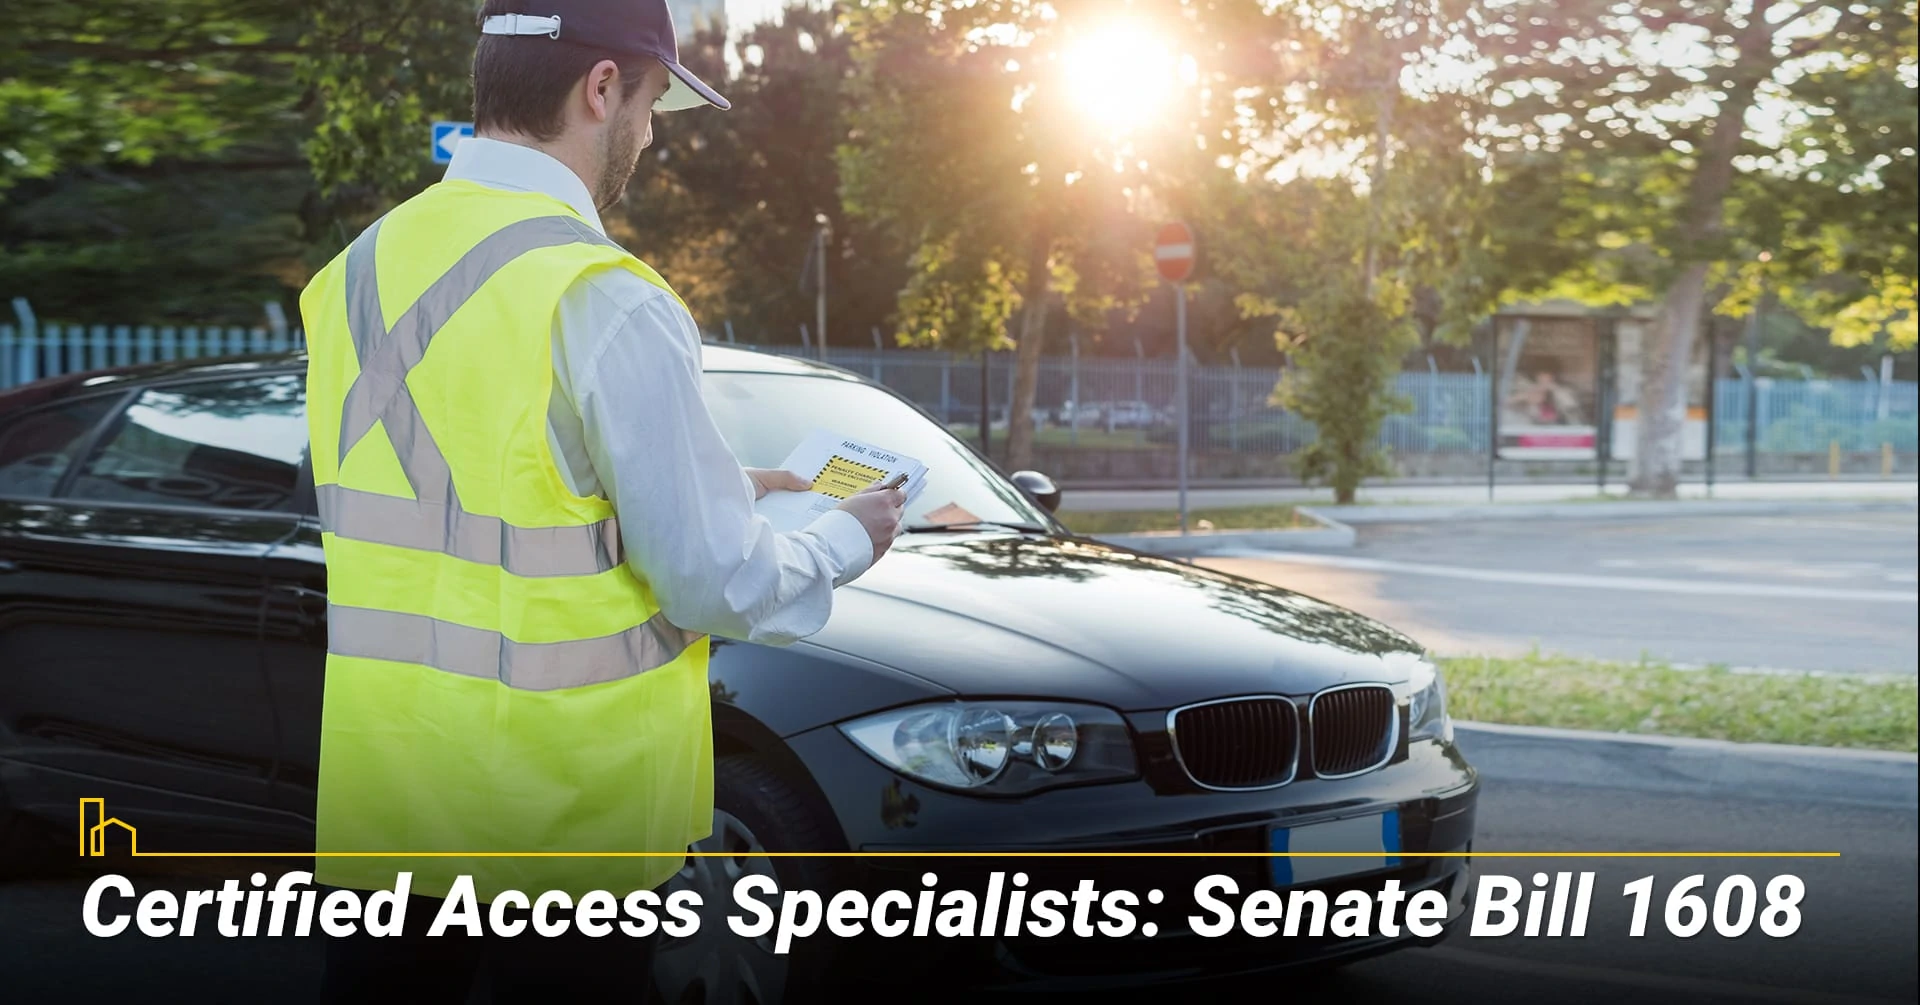 Certified Access Specialist, work with a certified access specialist